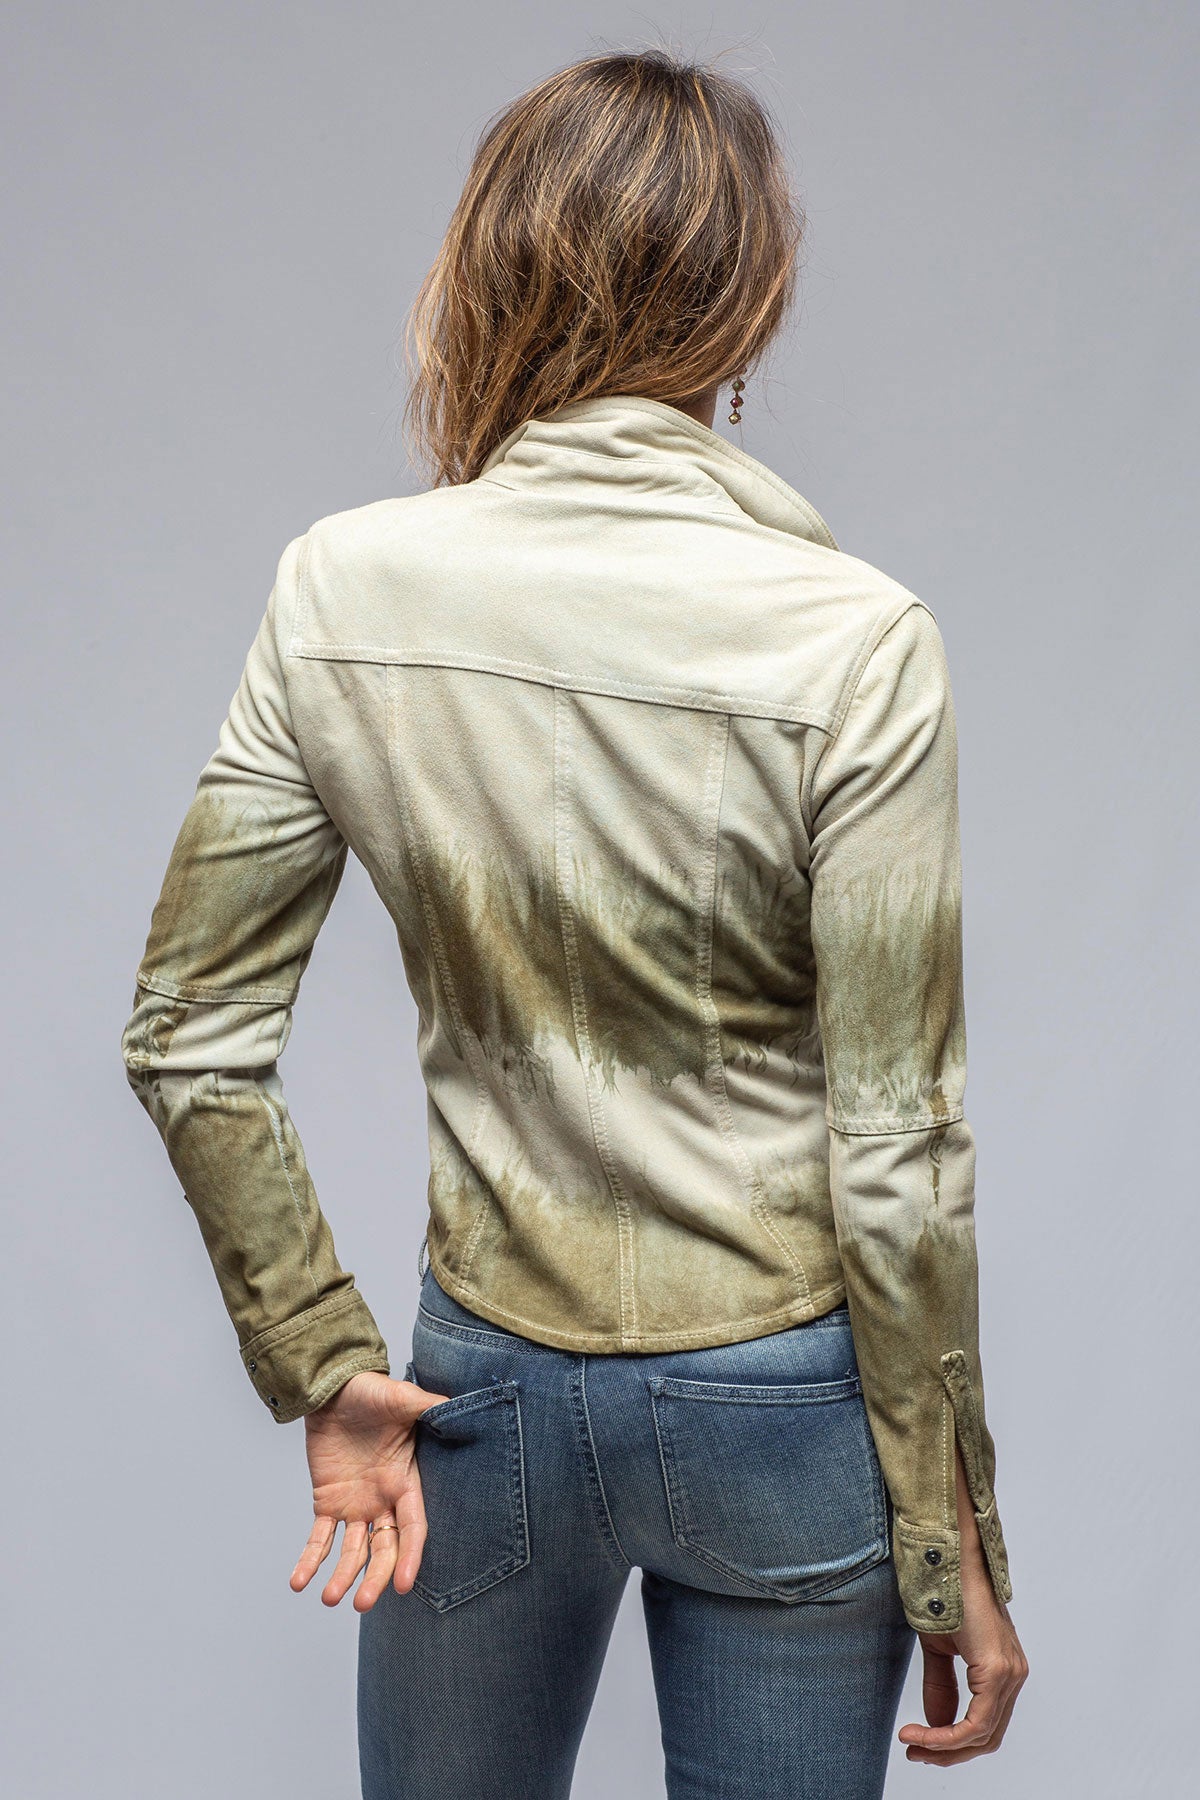 Marana Suede Shirt In Ice/Green Tie-Die | Ladies - Outerwear - Leather | Roncarati